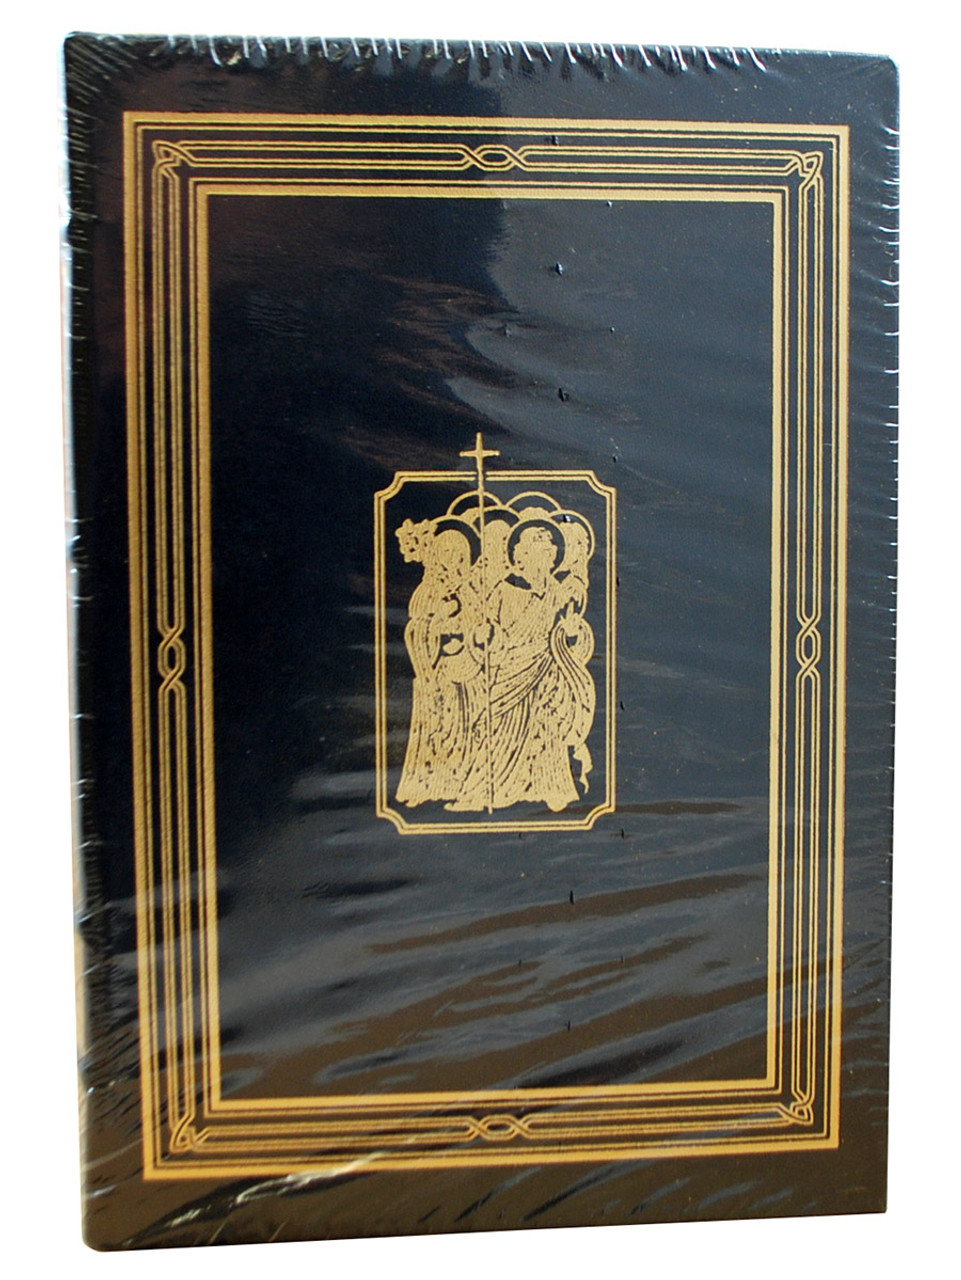 Easton Press "Butler's Lives Of The Saints" Limited Edition, Leather Bound Collector's Edition, Complete Matching  4-Vol Set [Sealed]